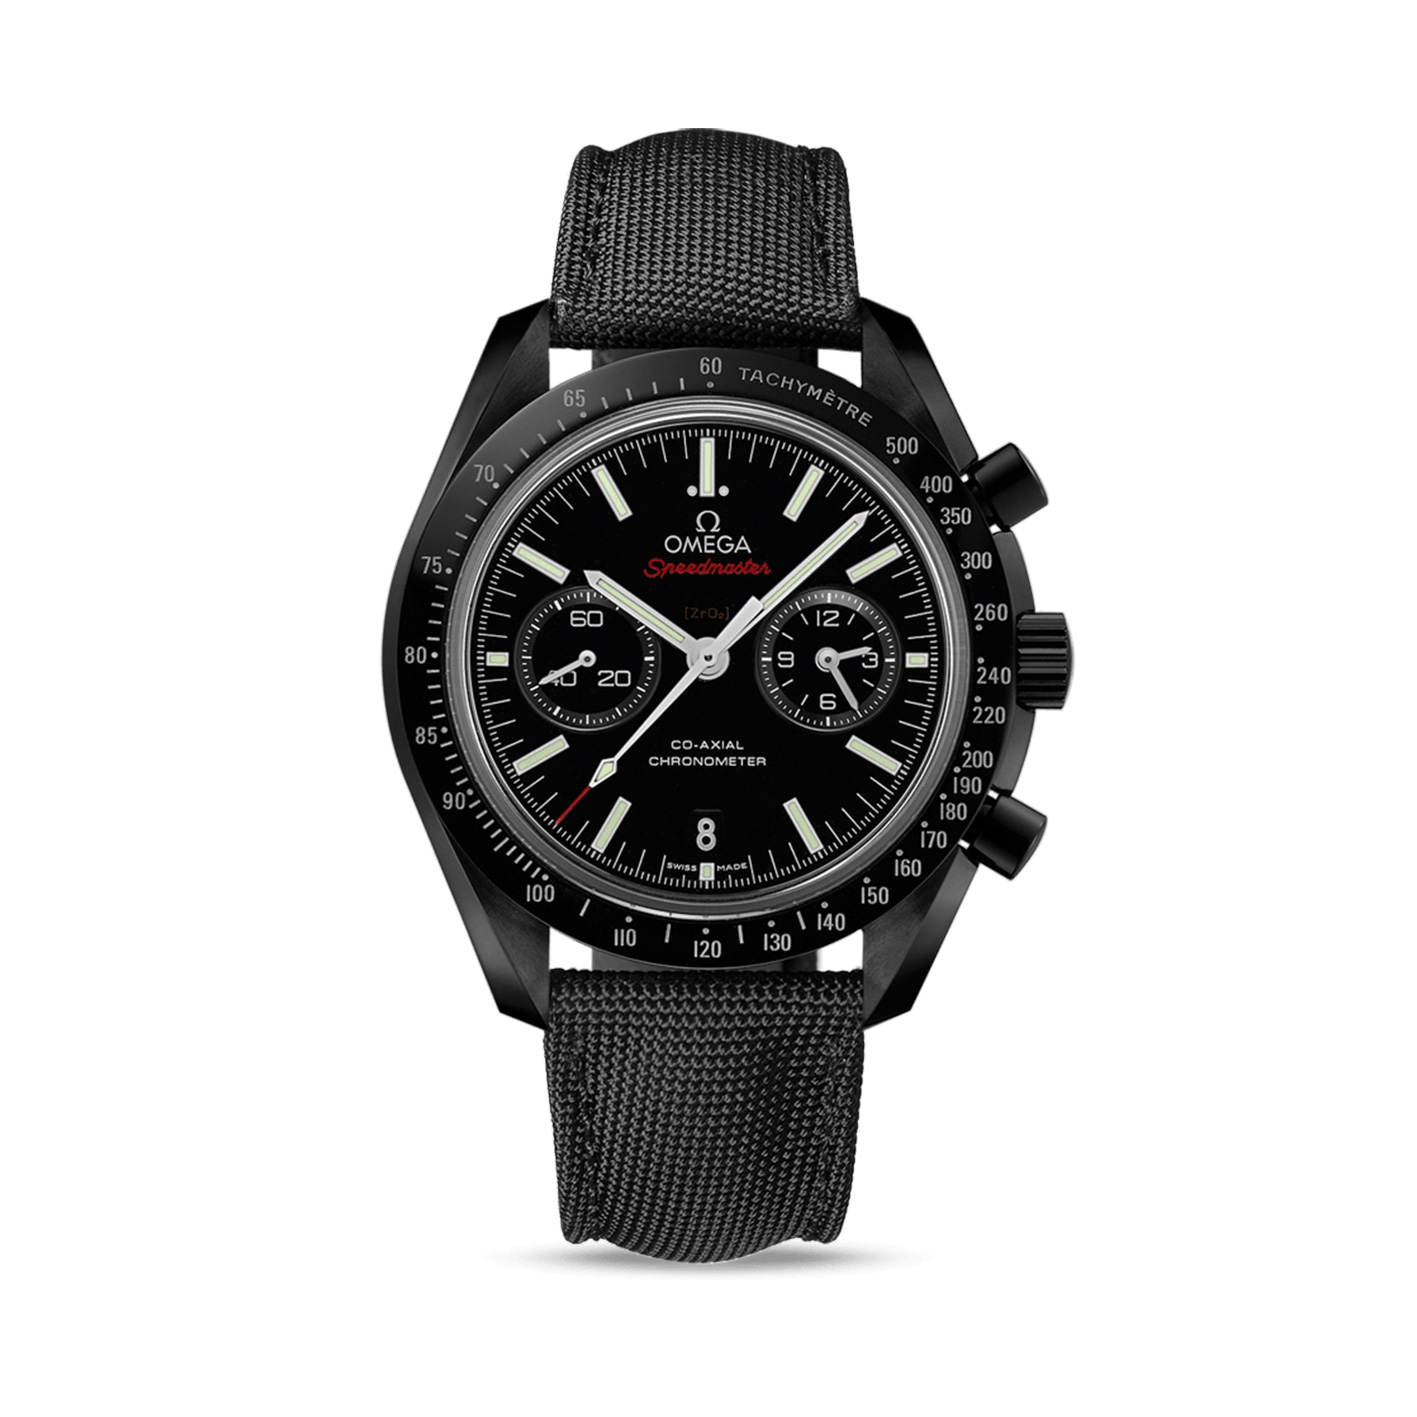 Speedmaster Moonwatch Co-Axial Chronograph Dark Side of the Moon Watch